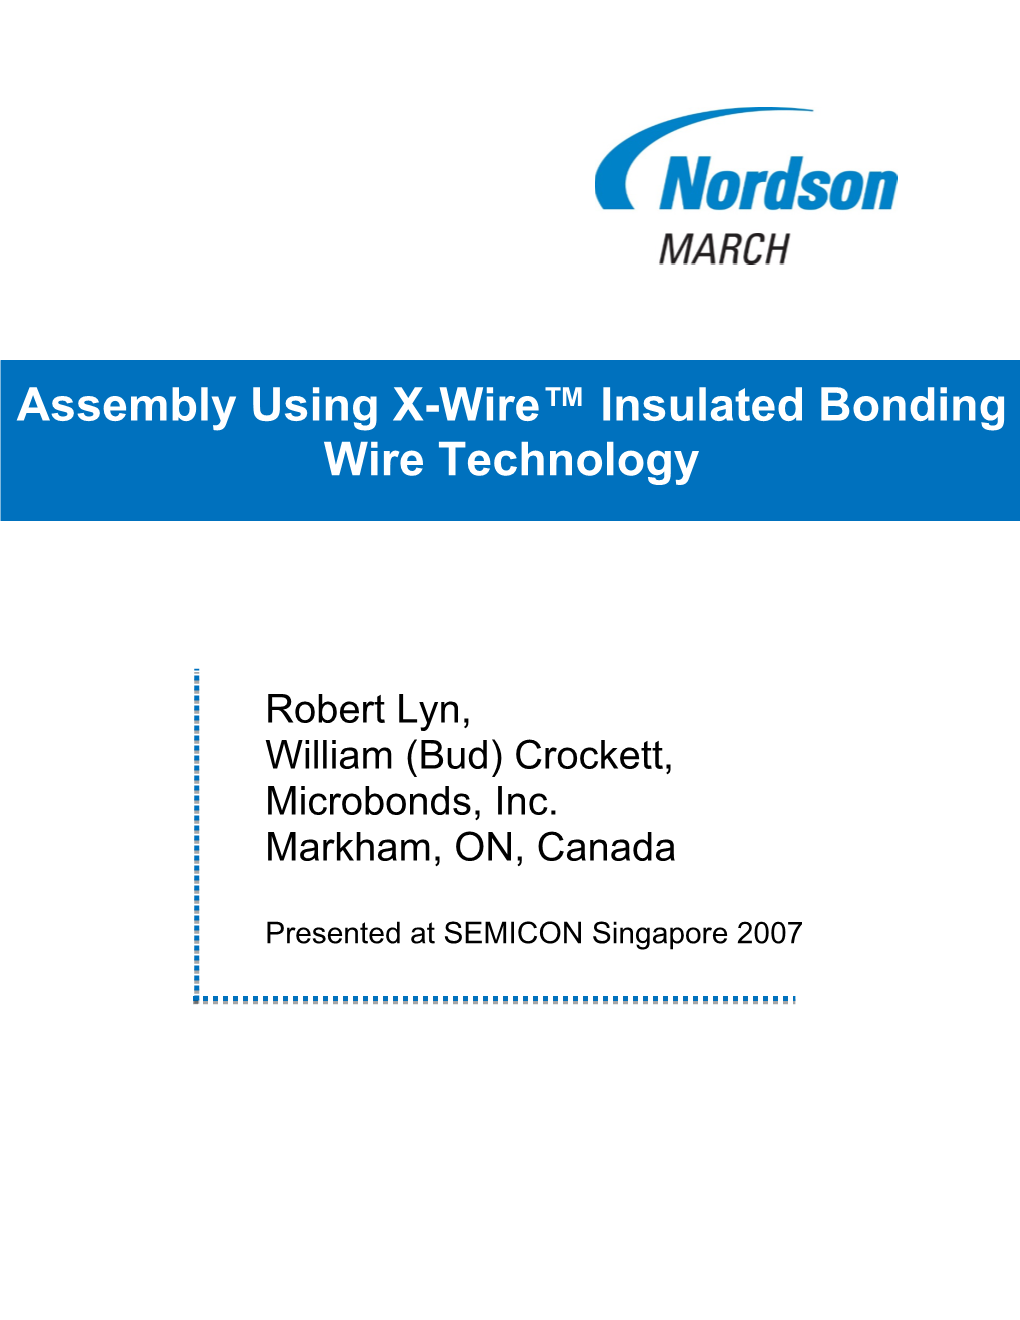 Assembly Using X-Wire™ Insulated Bonding Wire Technology